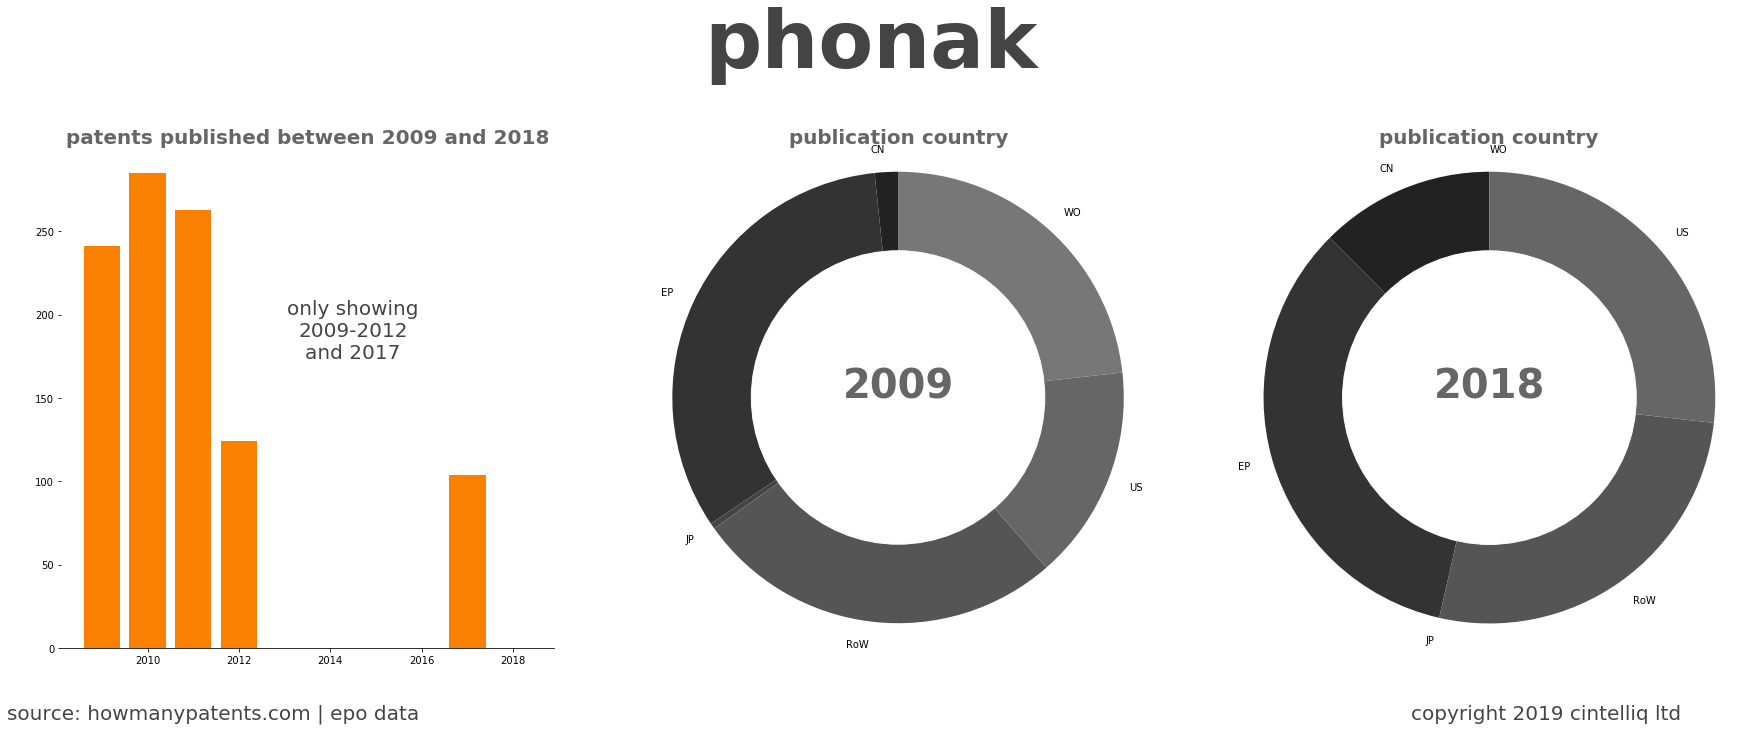 summary of patents for Phonak